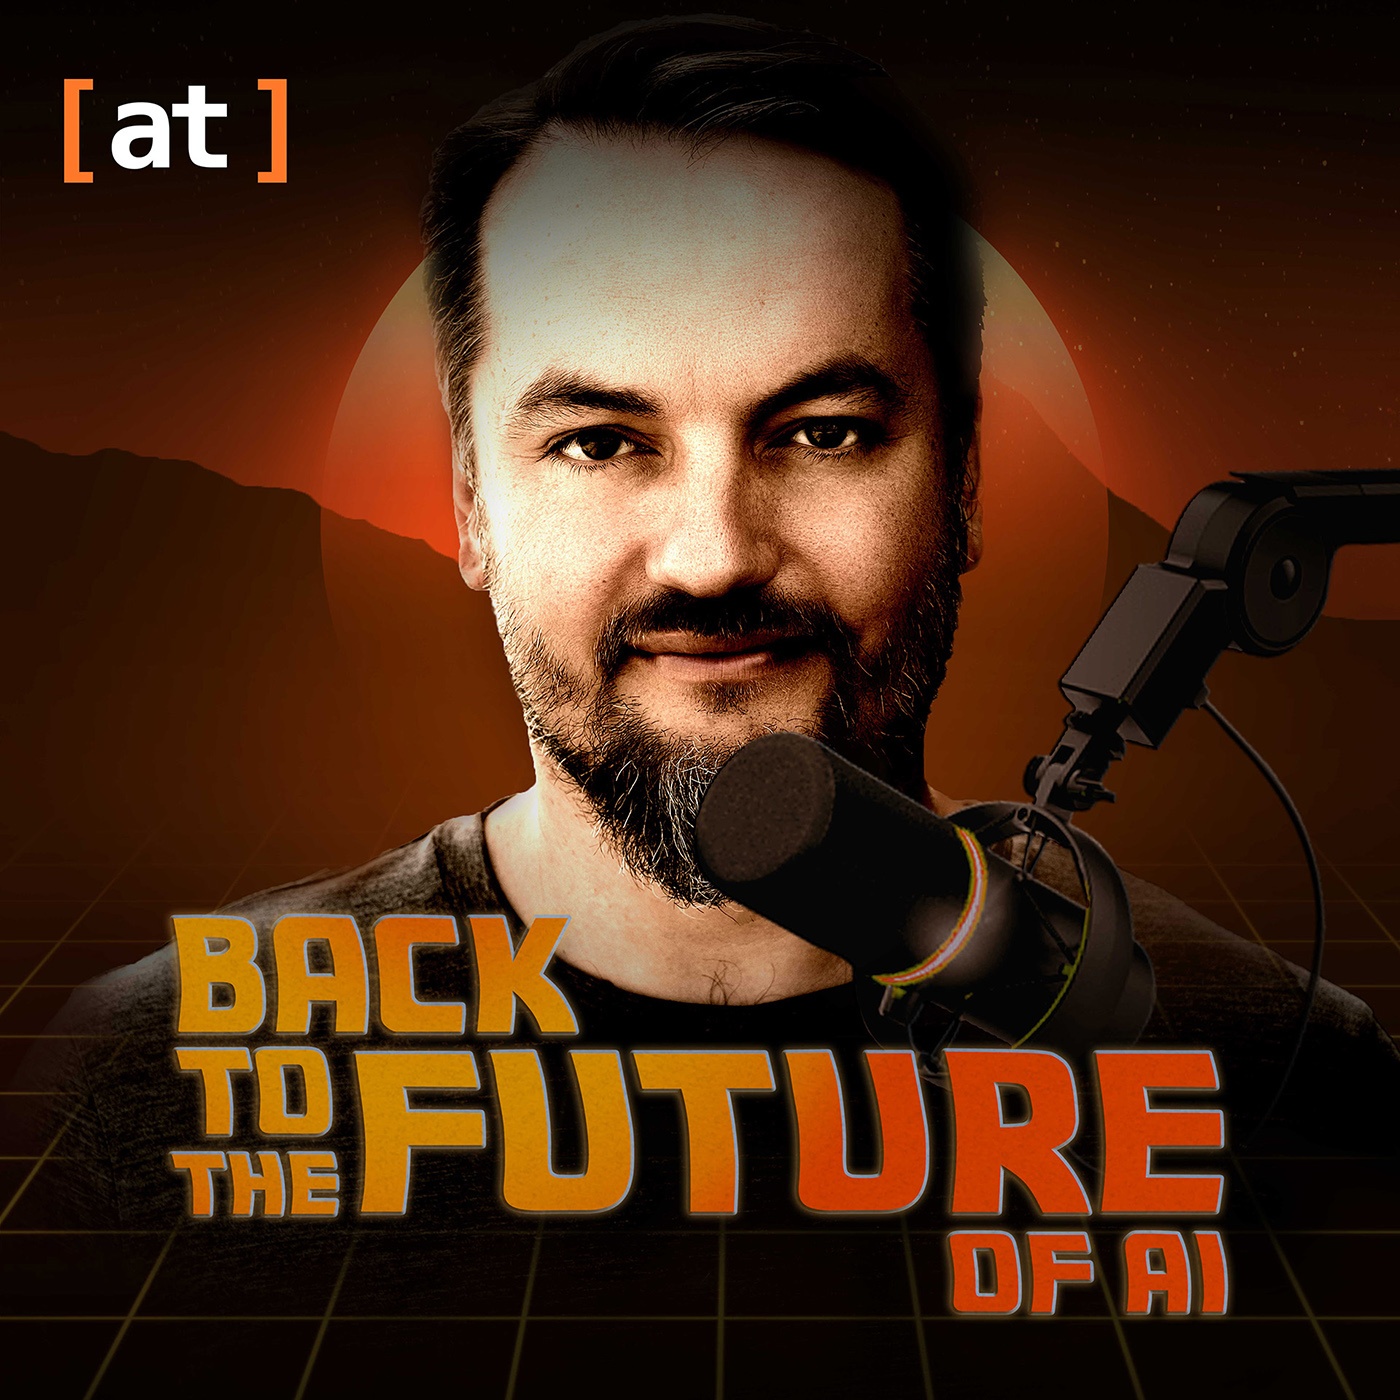 Teaser - Back to the Future of AI